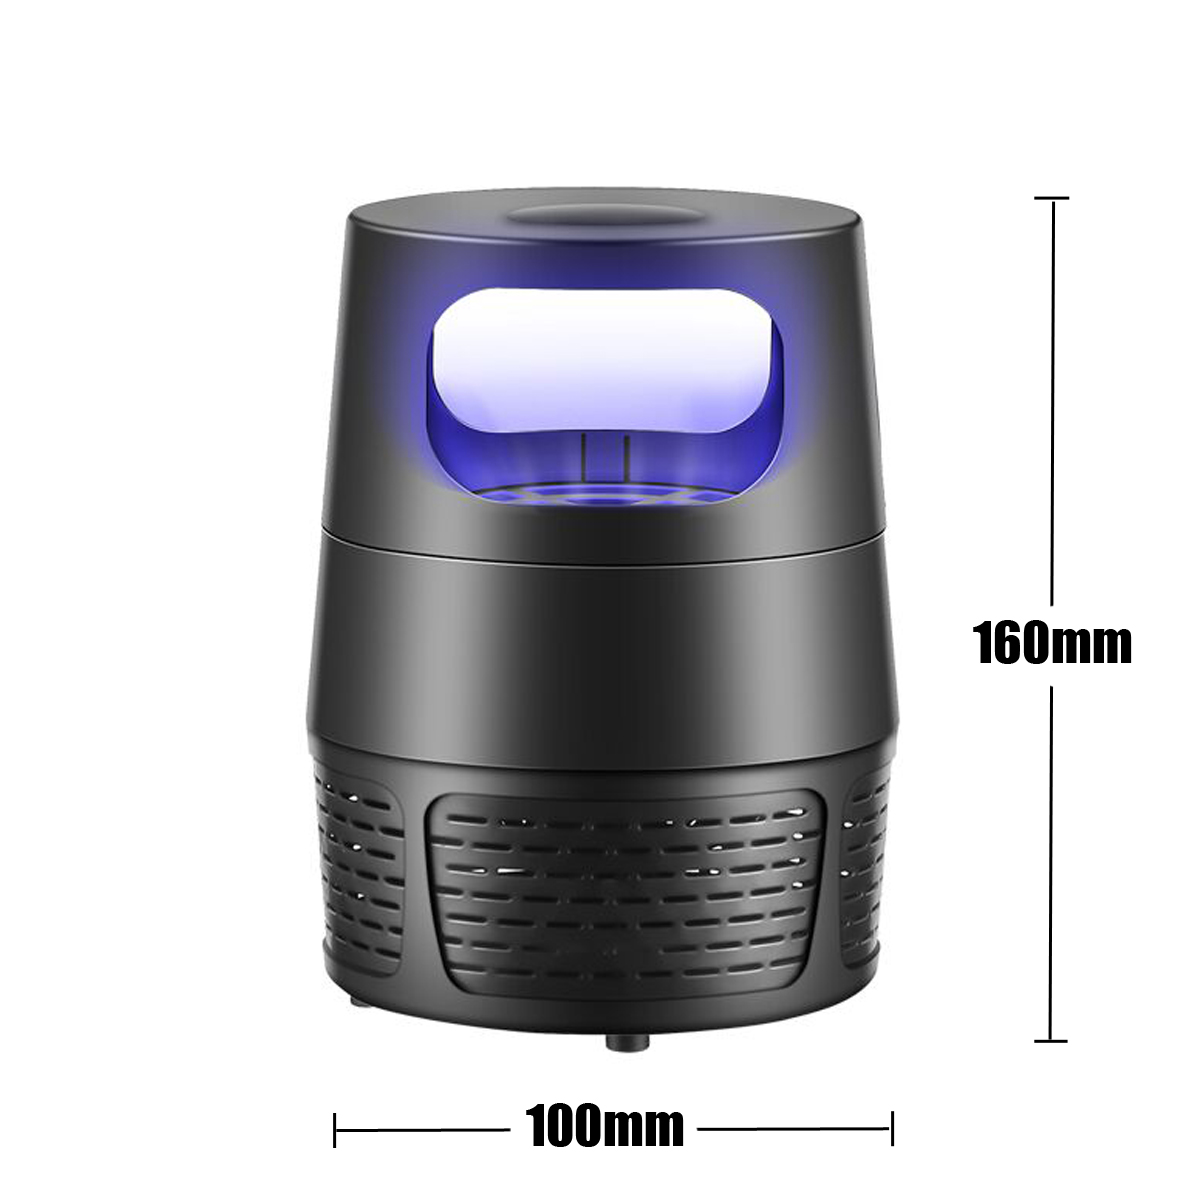 5V-USB-LED-Mosquito-Killer-Lamp-Insect-Fly-Bug-Zapper-Trap-Pest-Control-UV-Light-Mosquito-Dispeller-1445790-8